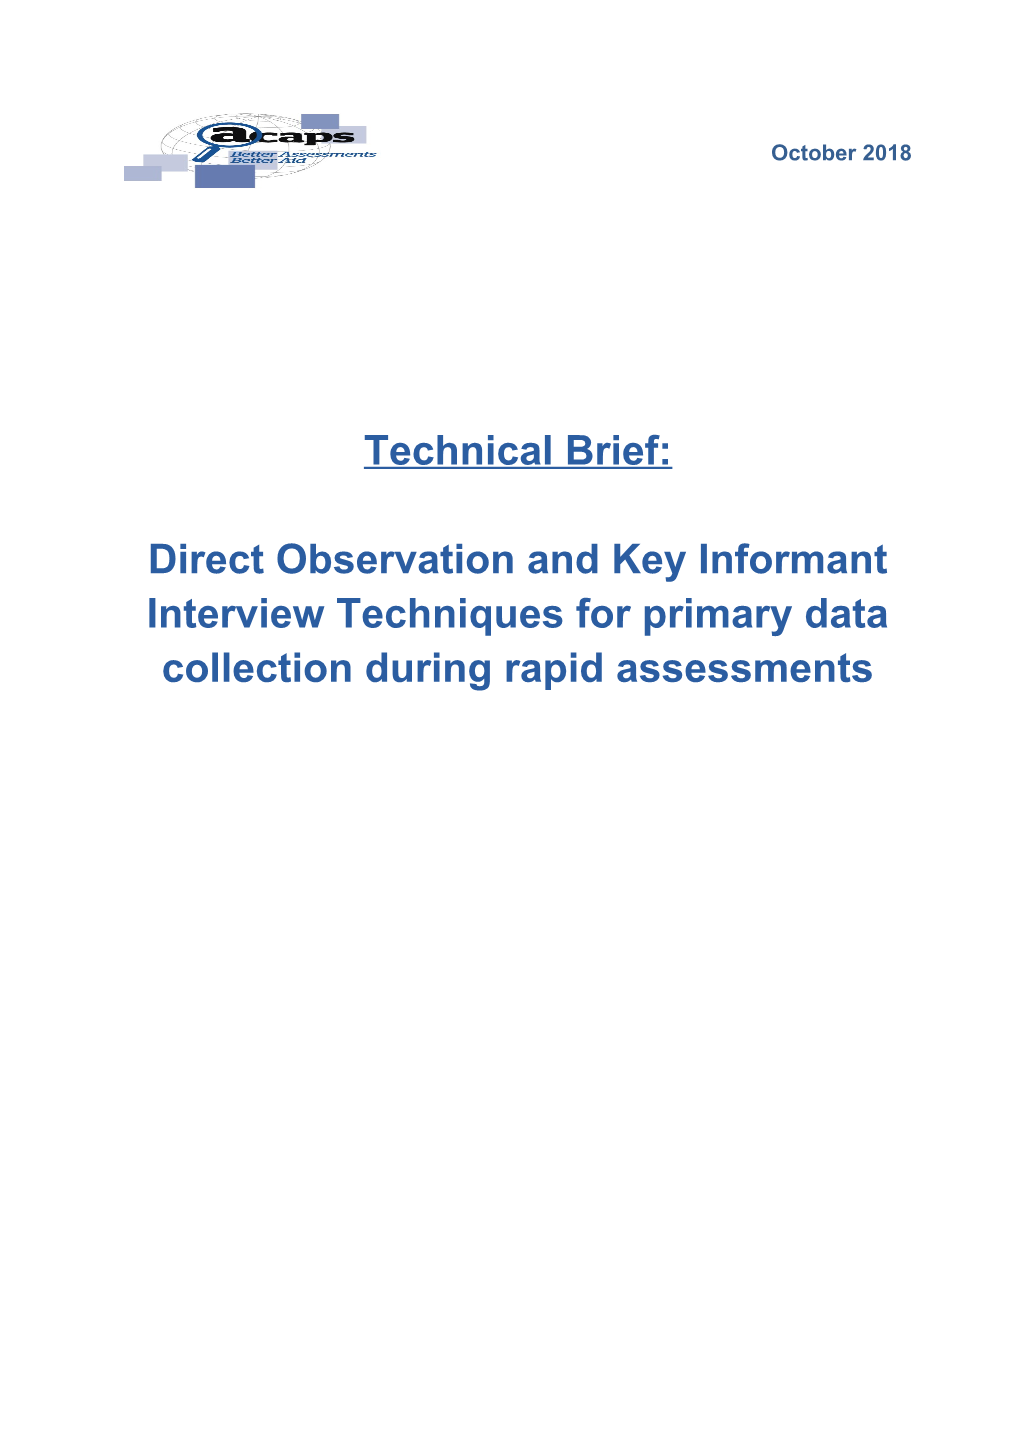 Technical Brief Direct Observation and Key Informant Interview Techniques